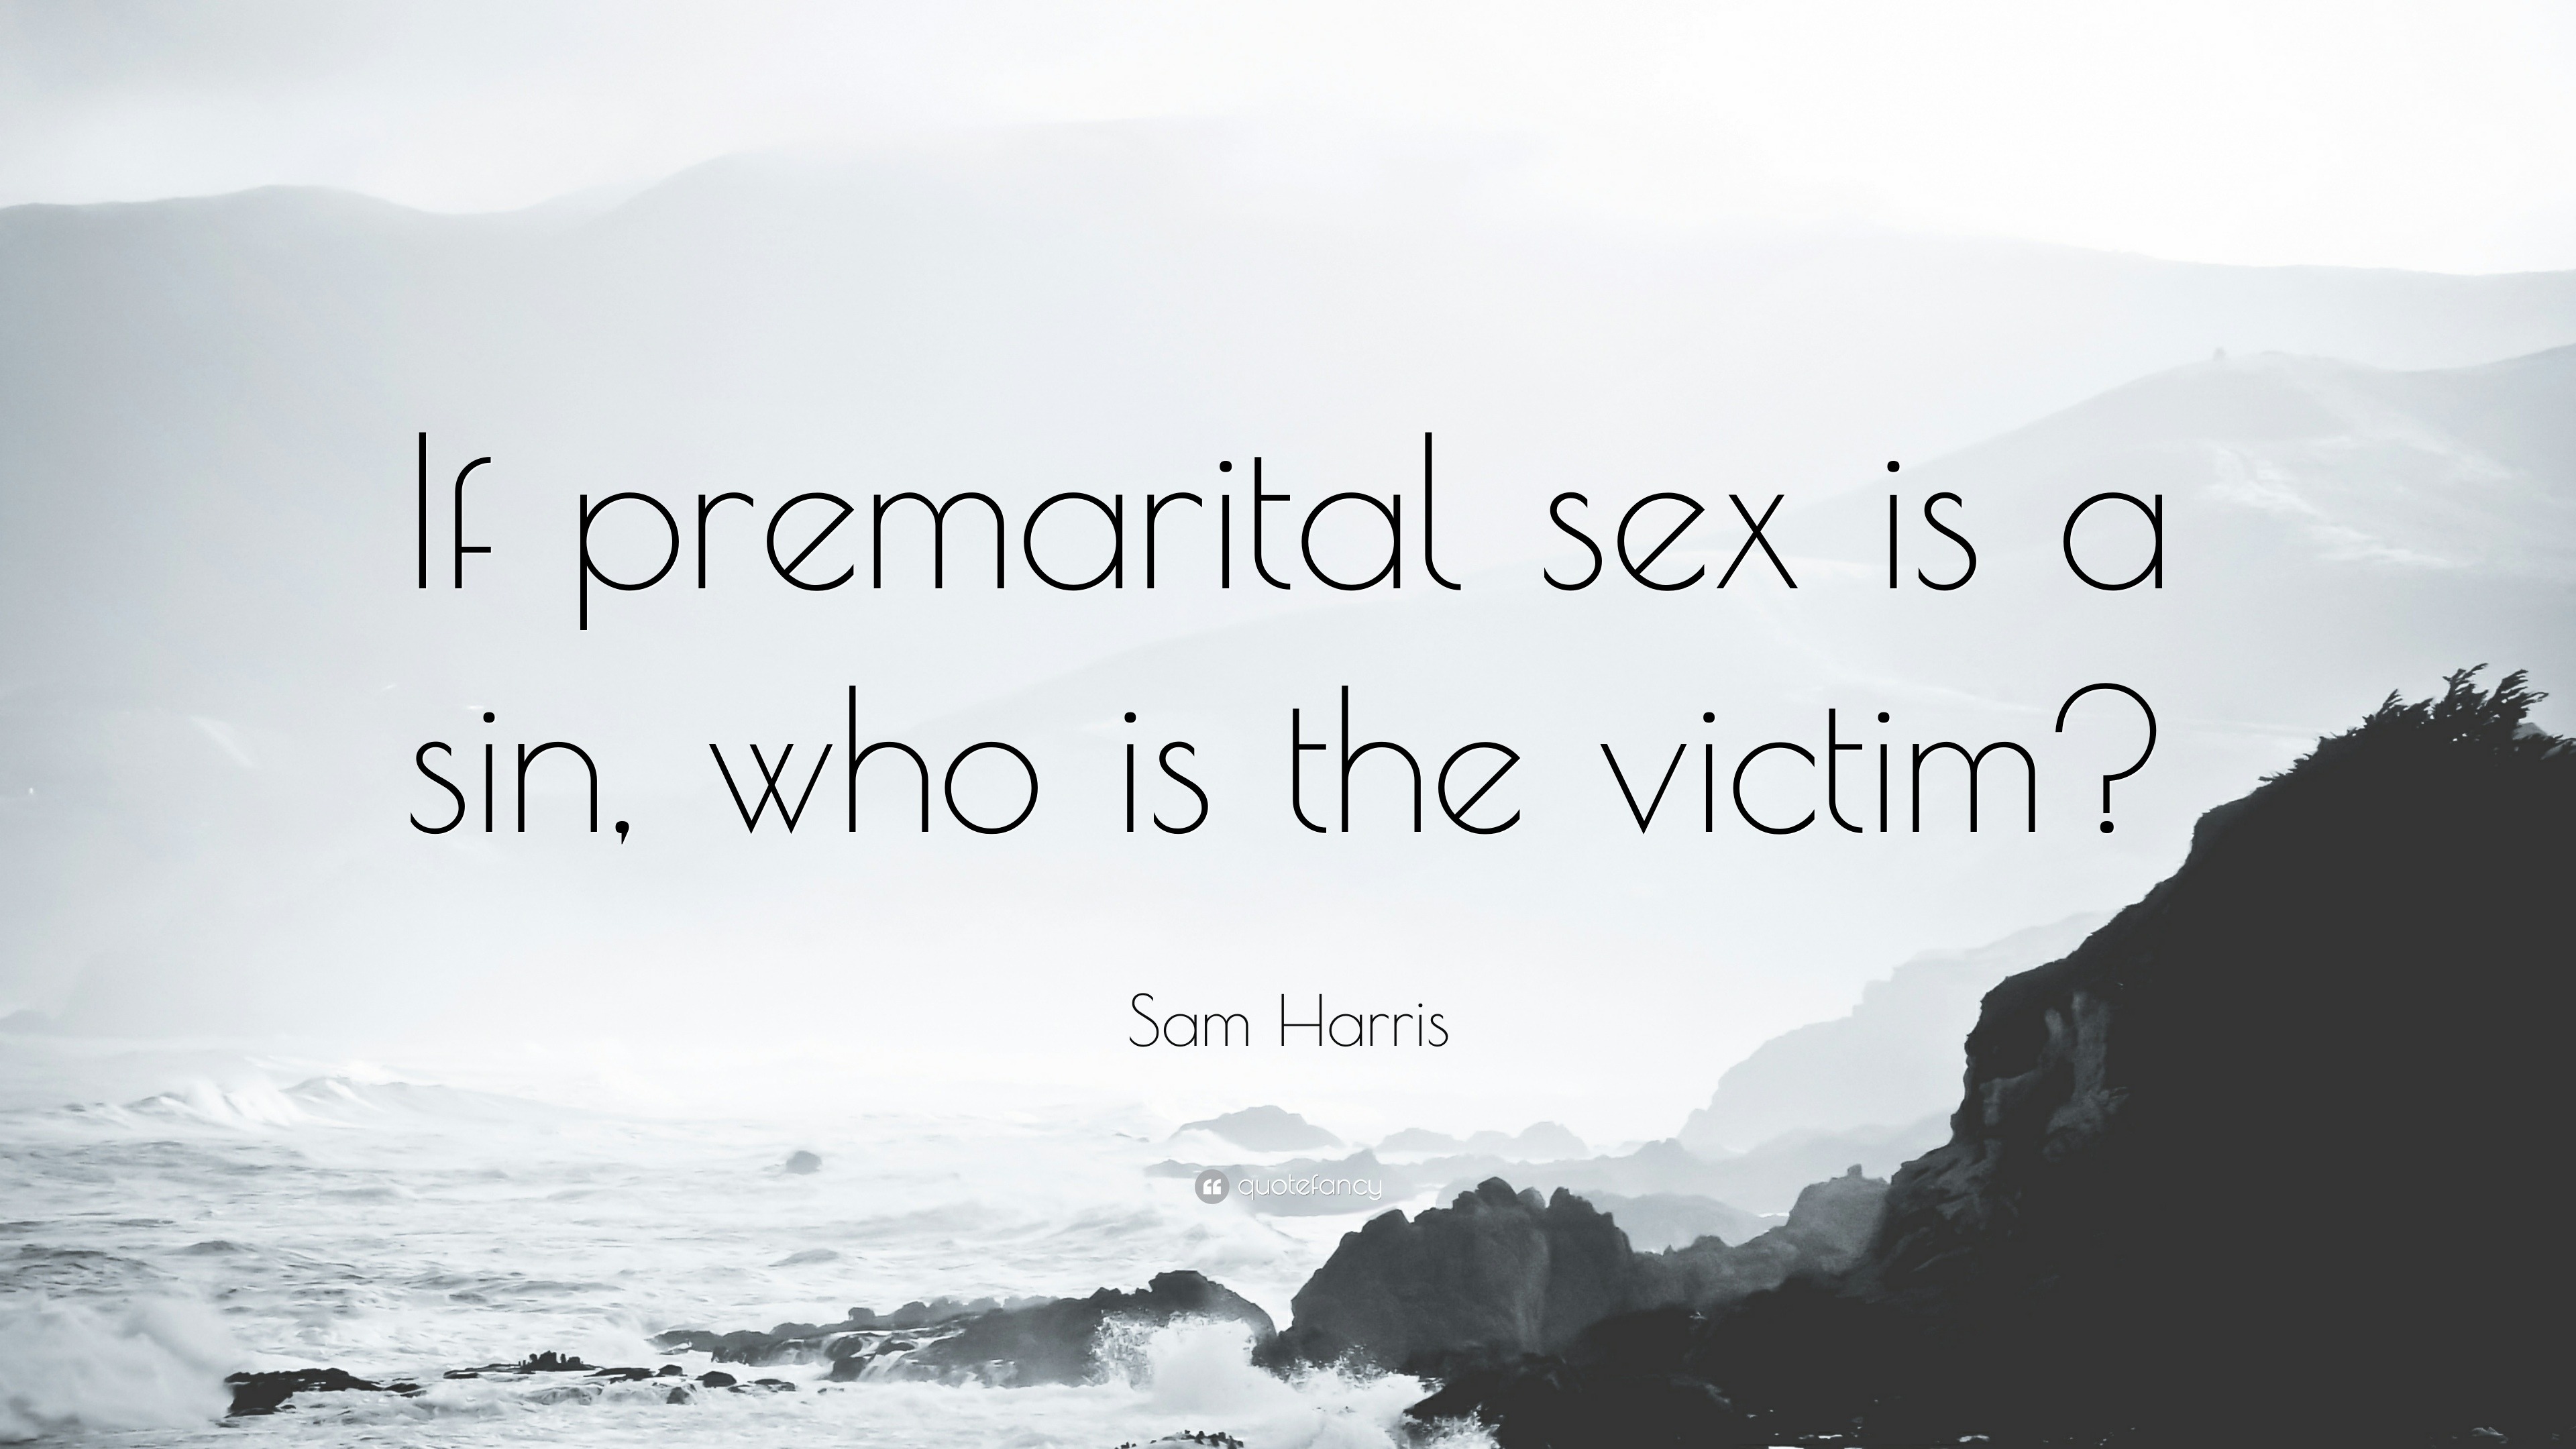 Sam Harris Quote “If premarital sex is a sin, who is the victim?” photo